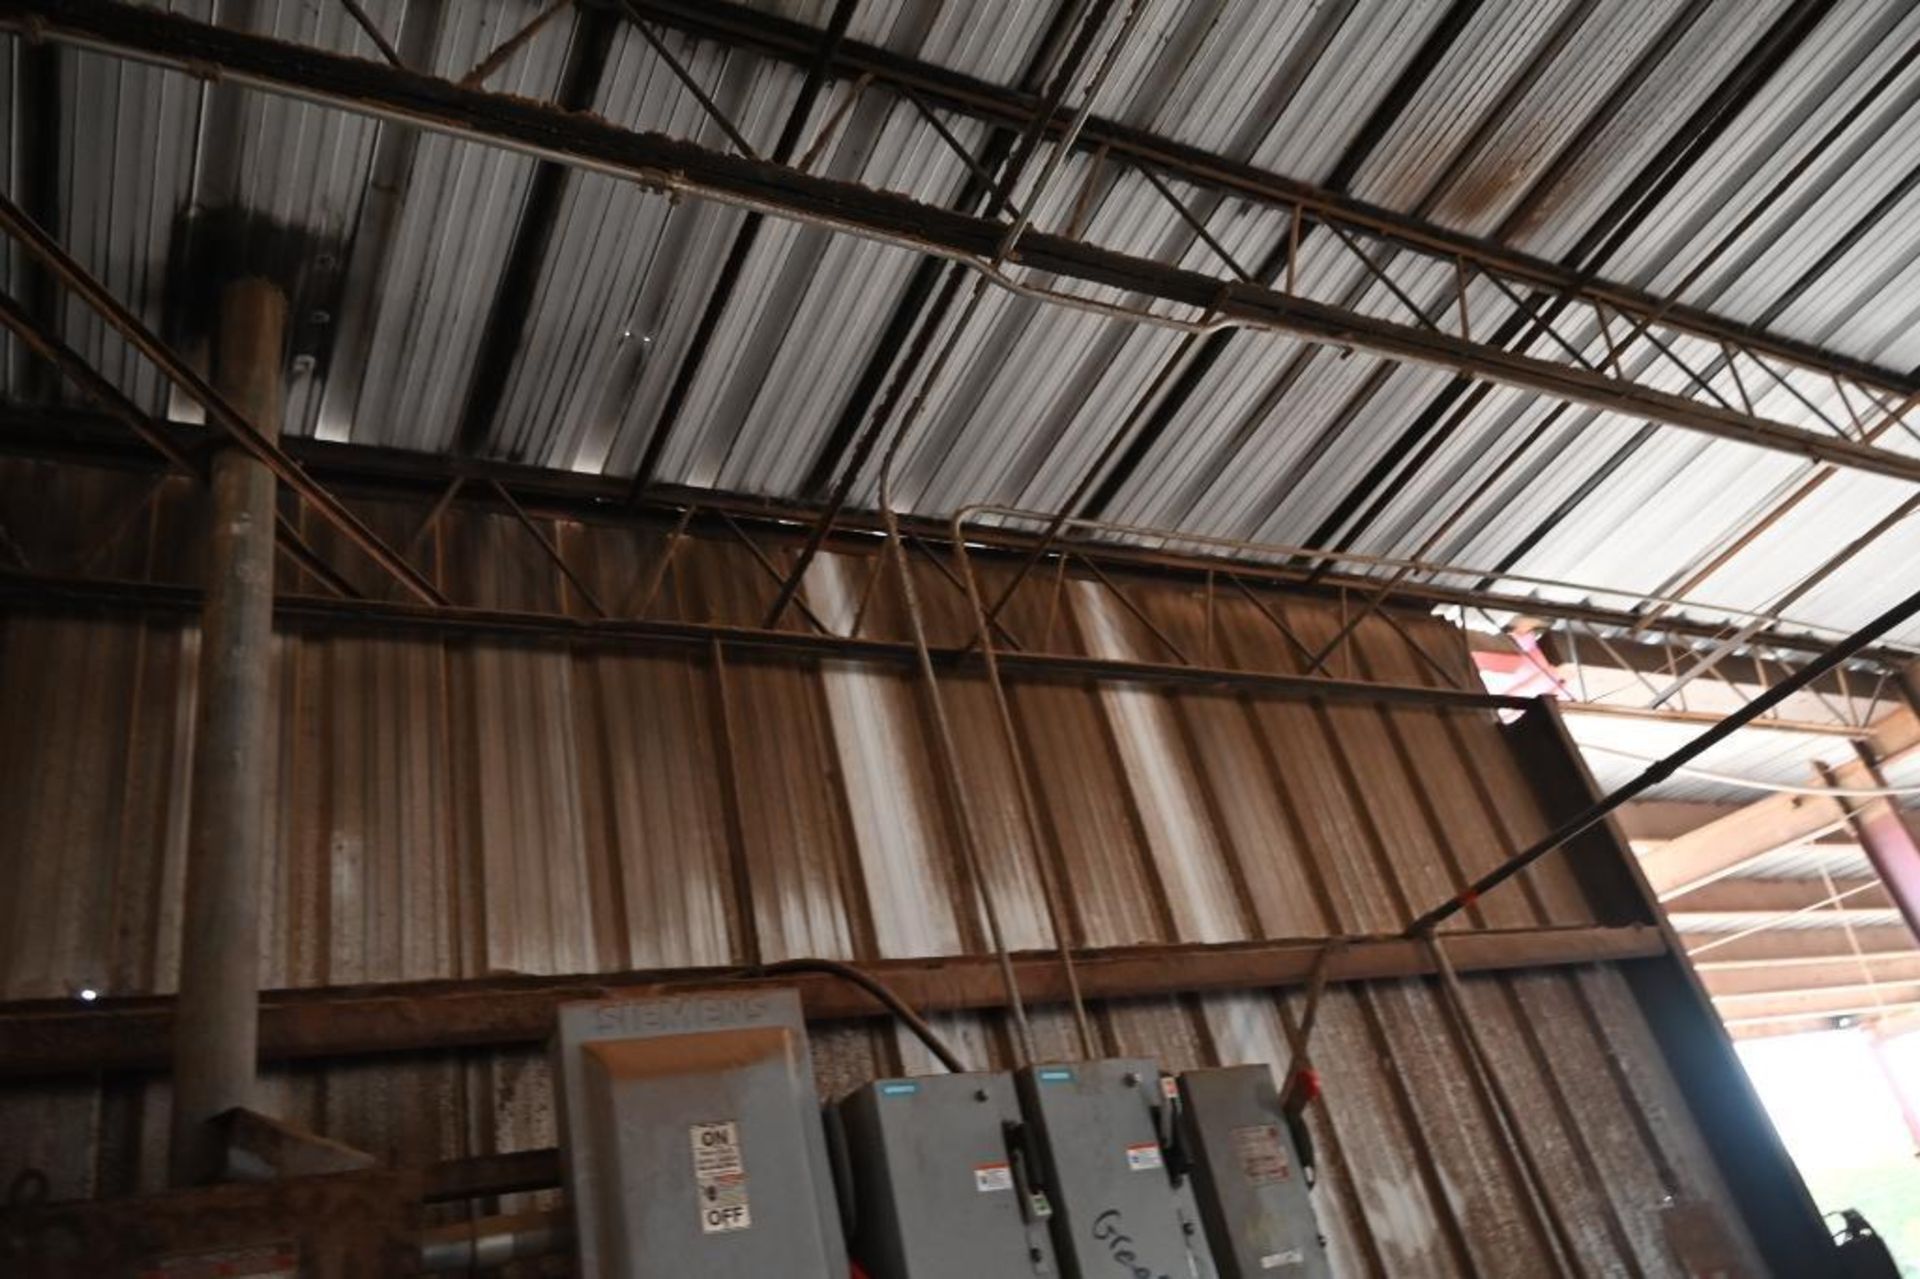 Electrical in Main Sawmill Building - Image 10 of 13